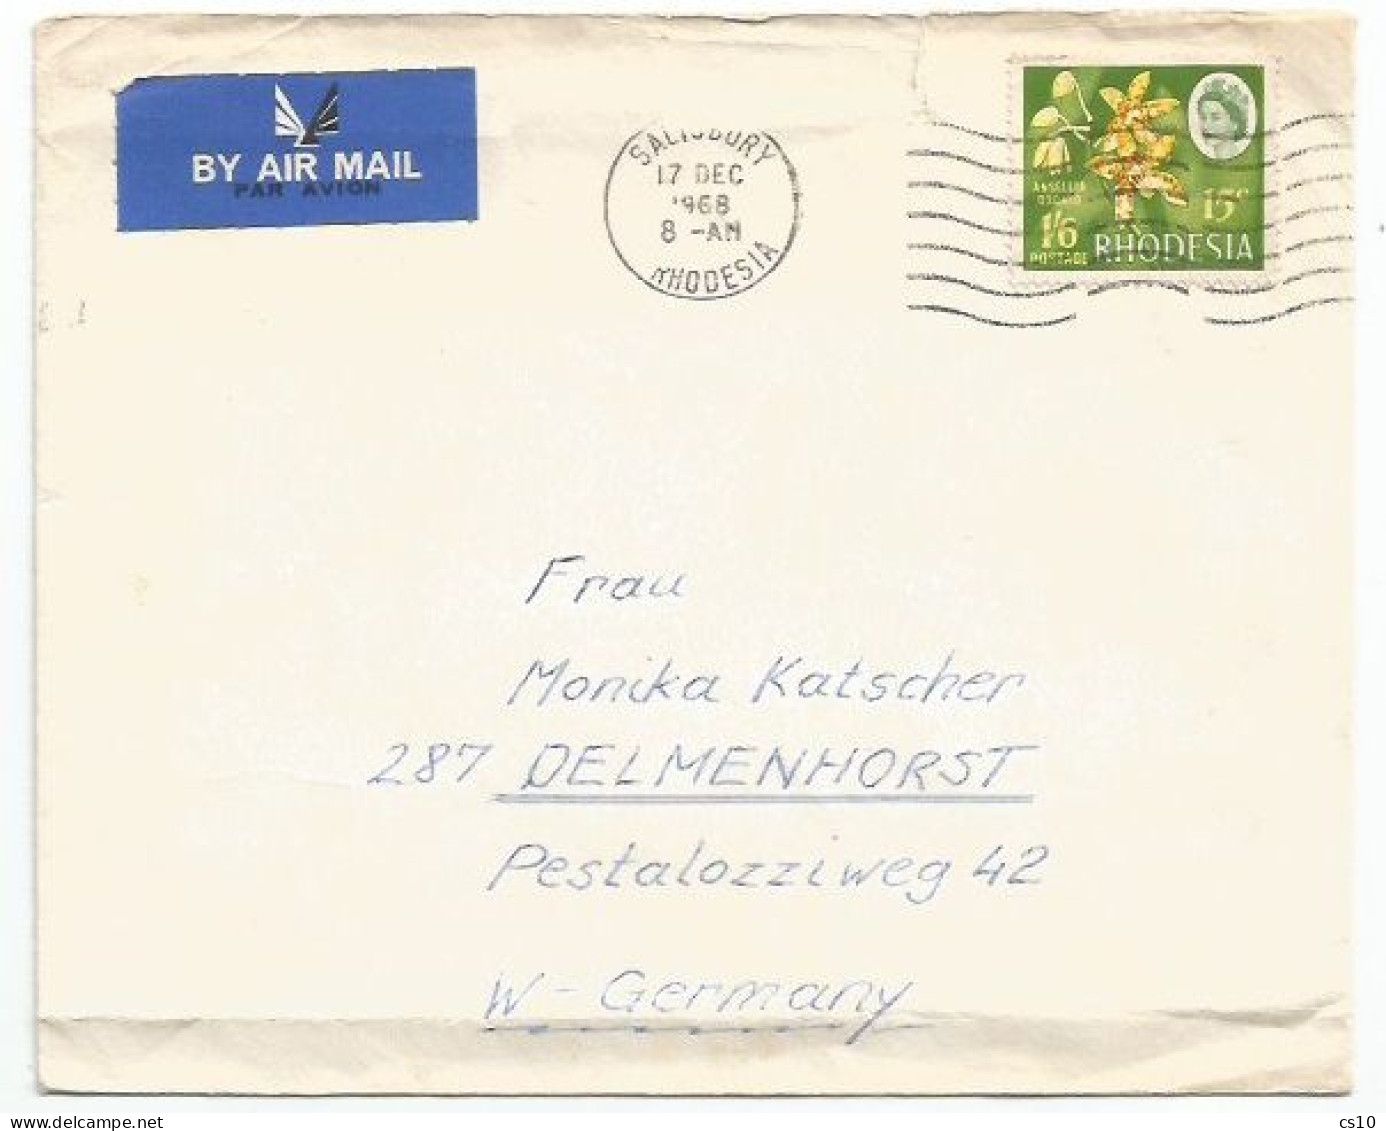 Rhodesia Airmail Cover Salisbury 17dec1968 To Germany BRD With Orchids 1S6 = C.15 Solo Franking - Rhodesia (1964-1980)